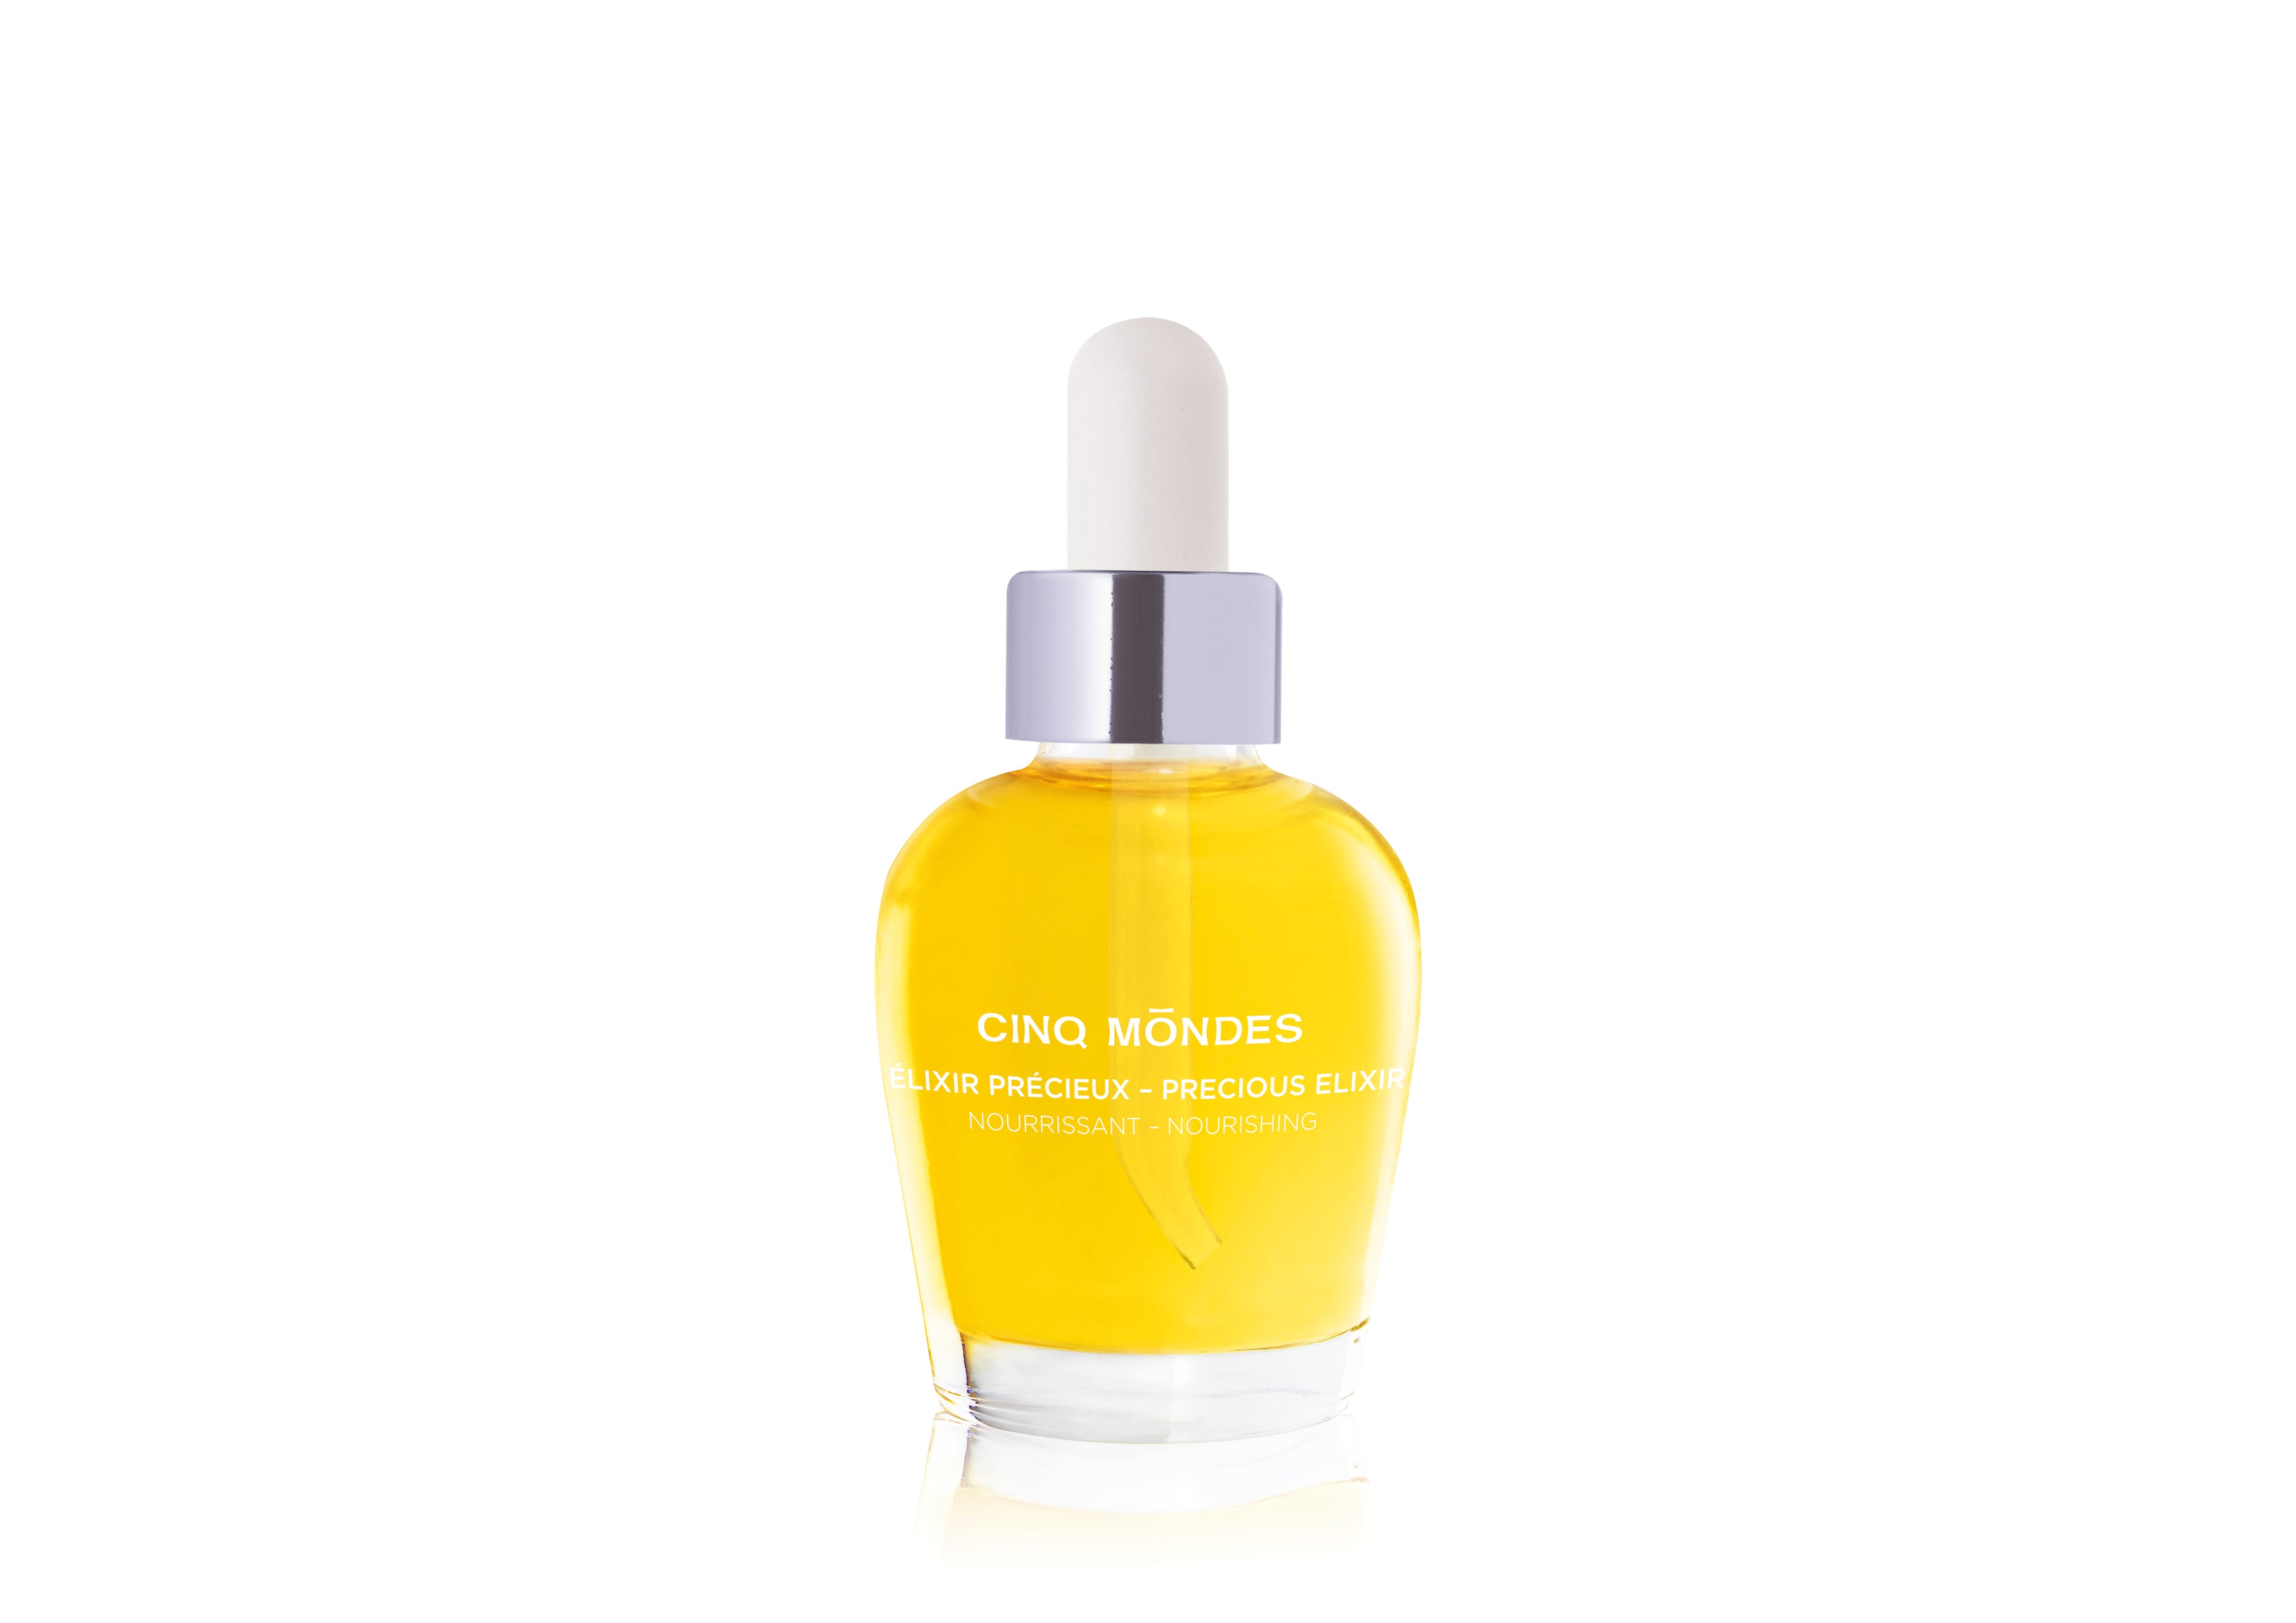 This facial oil contains a concentrated blend of 100% plant-derived oils for deep nourishment and moisture for dry or dehydrated skin